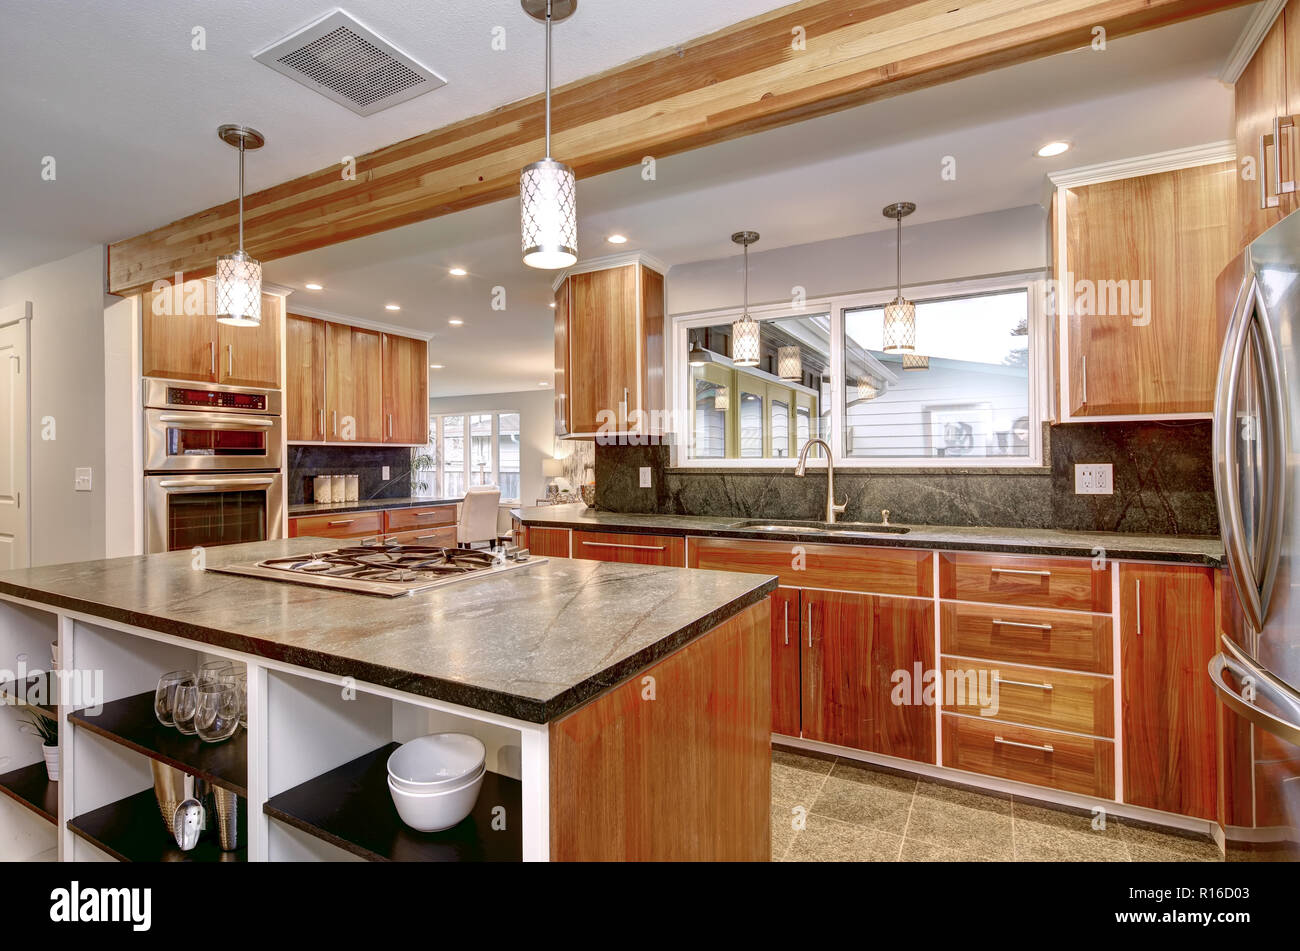 Luxurious kitchen room with stainless steel appliances, dark counter tops and tiled floor. Stock Photo